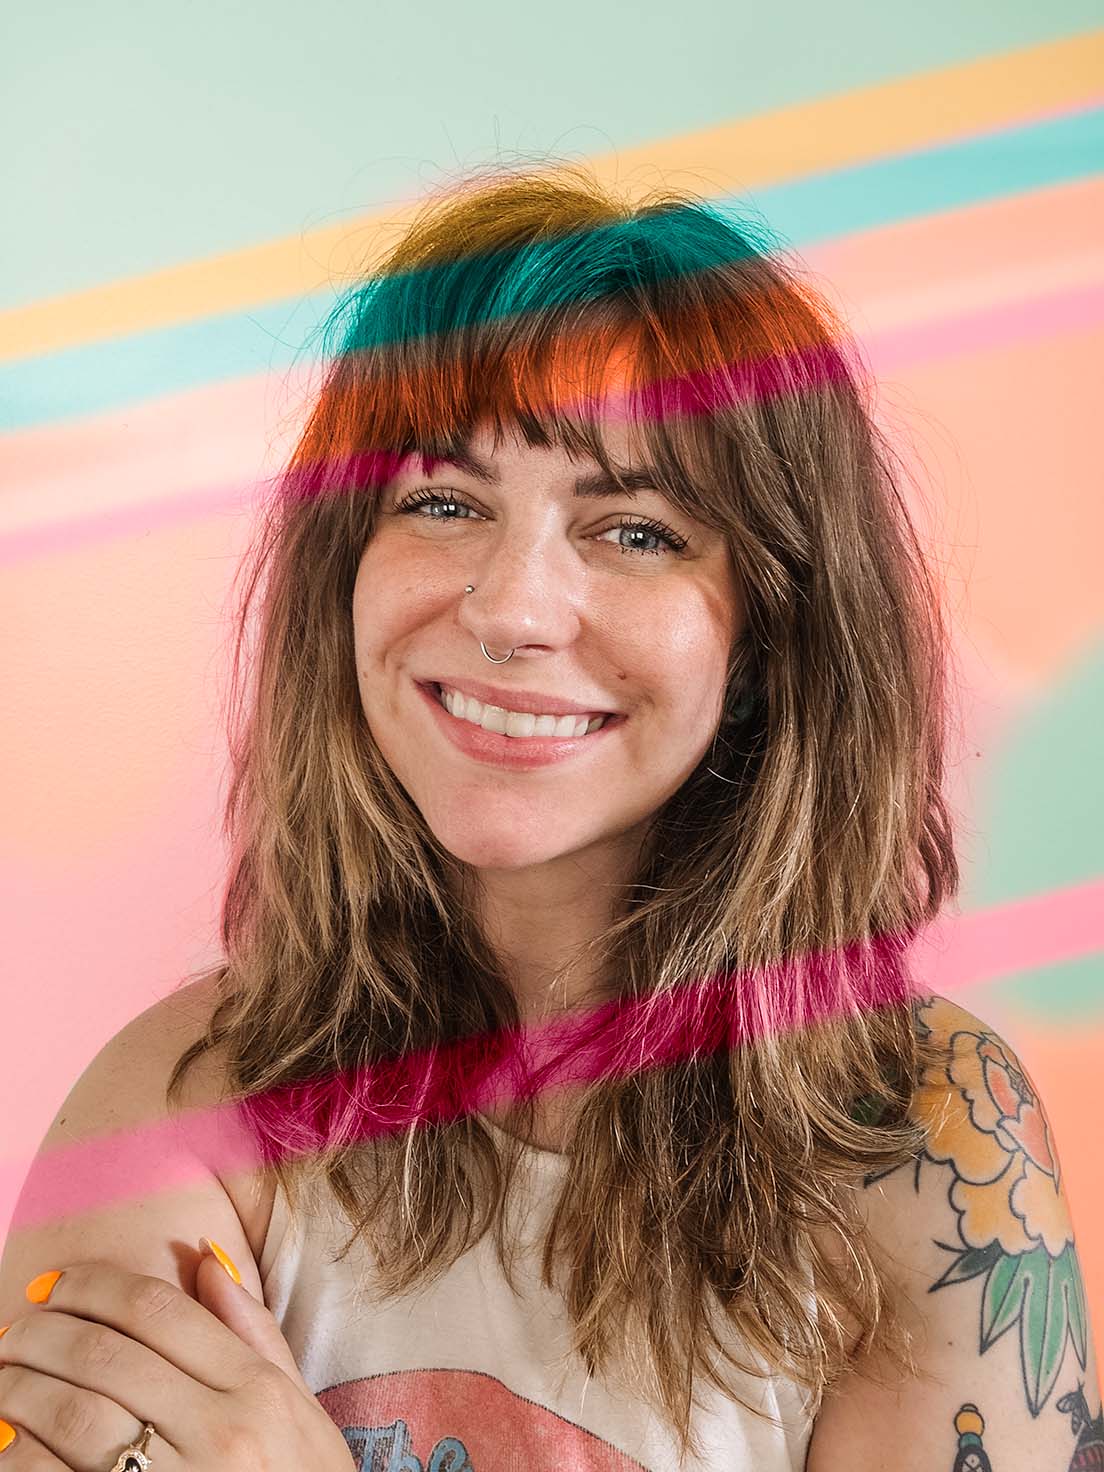 white woman with long hair and bangs smiling, pink streaks photoshopped across her face and colorful background